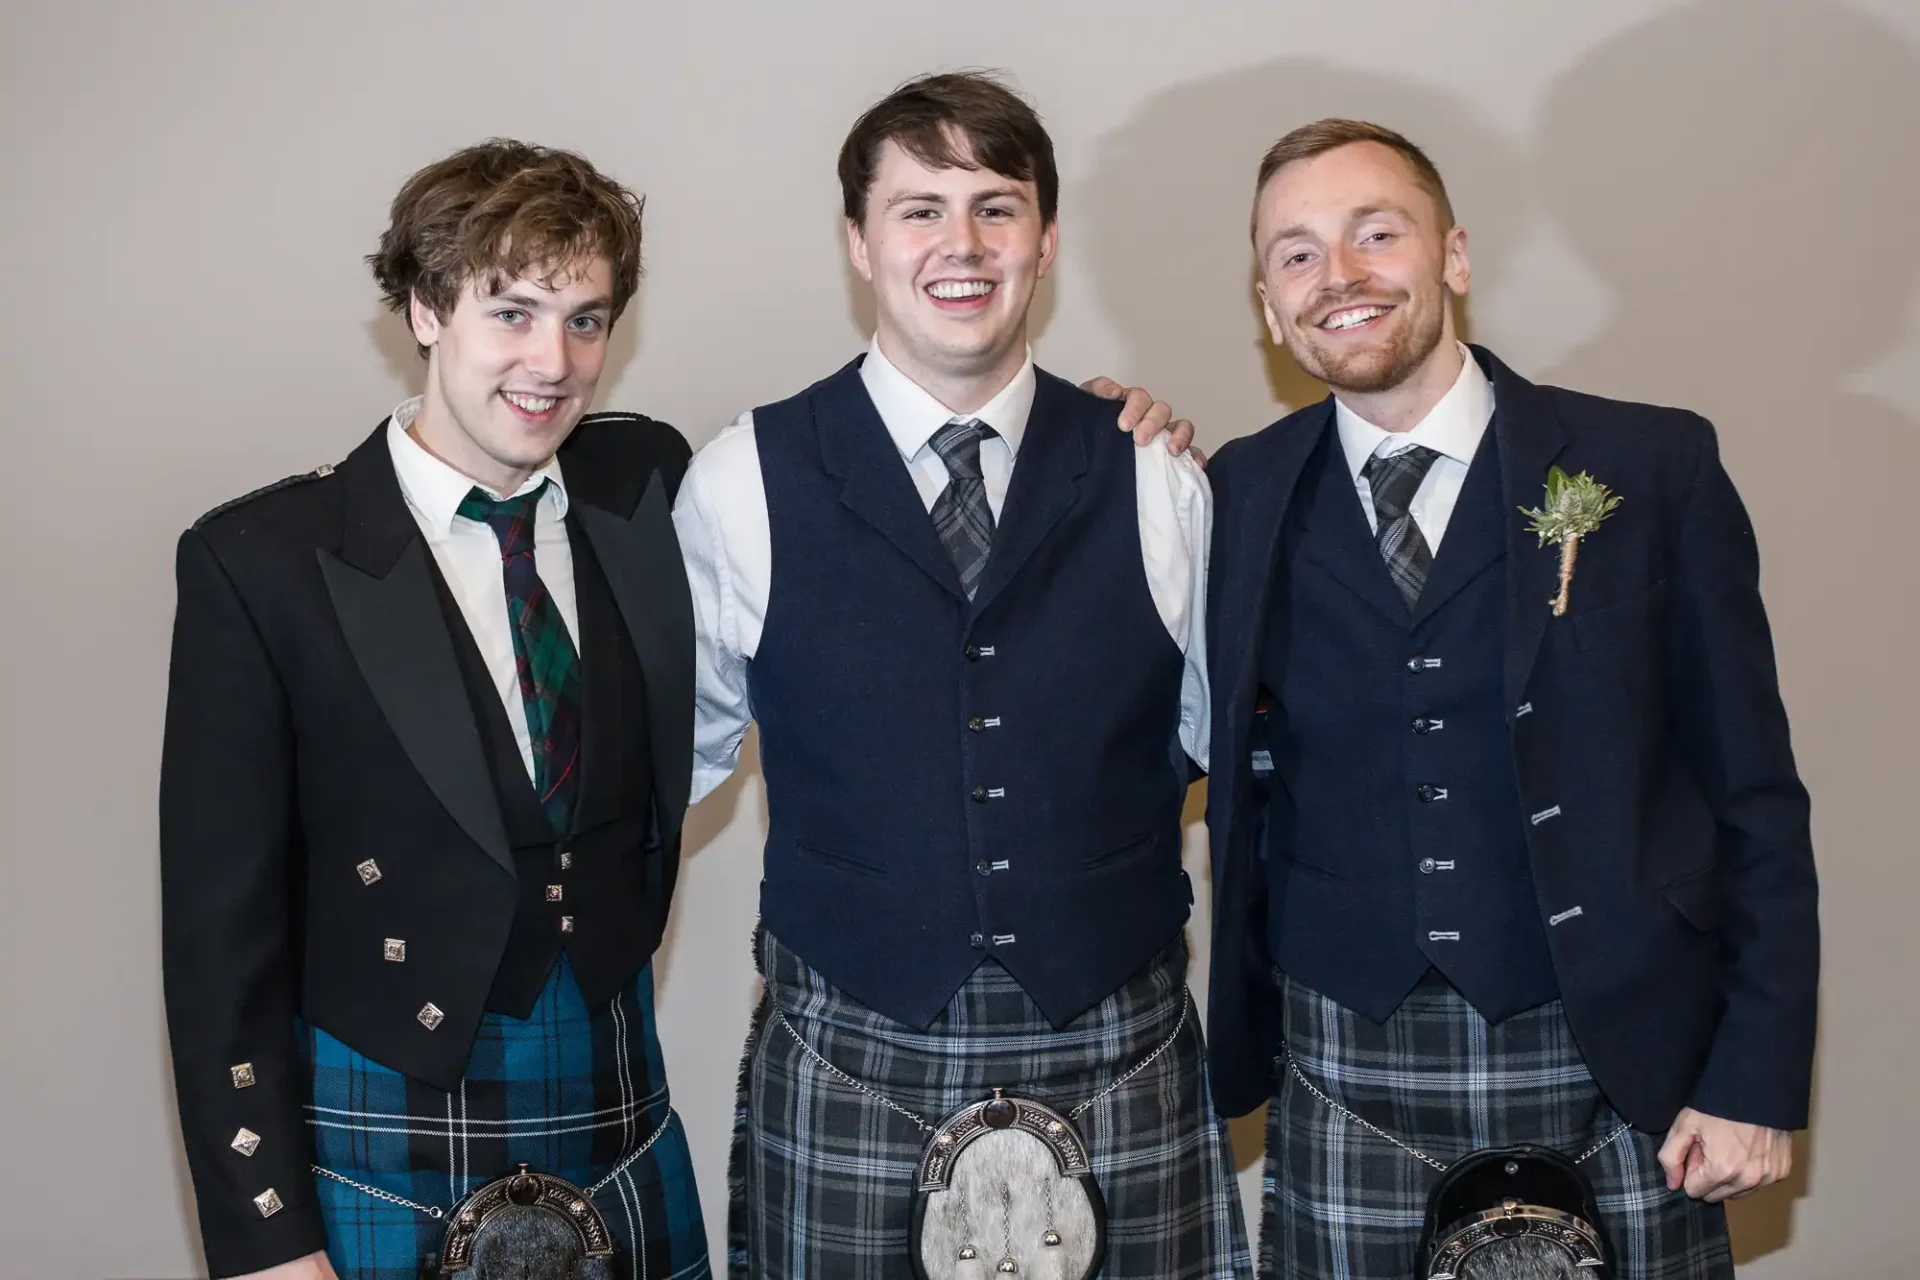 Three men in traditional scottish attire with kilts and waistcoats, smiling at a formal event.